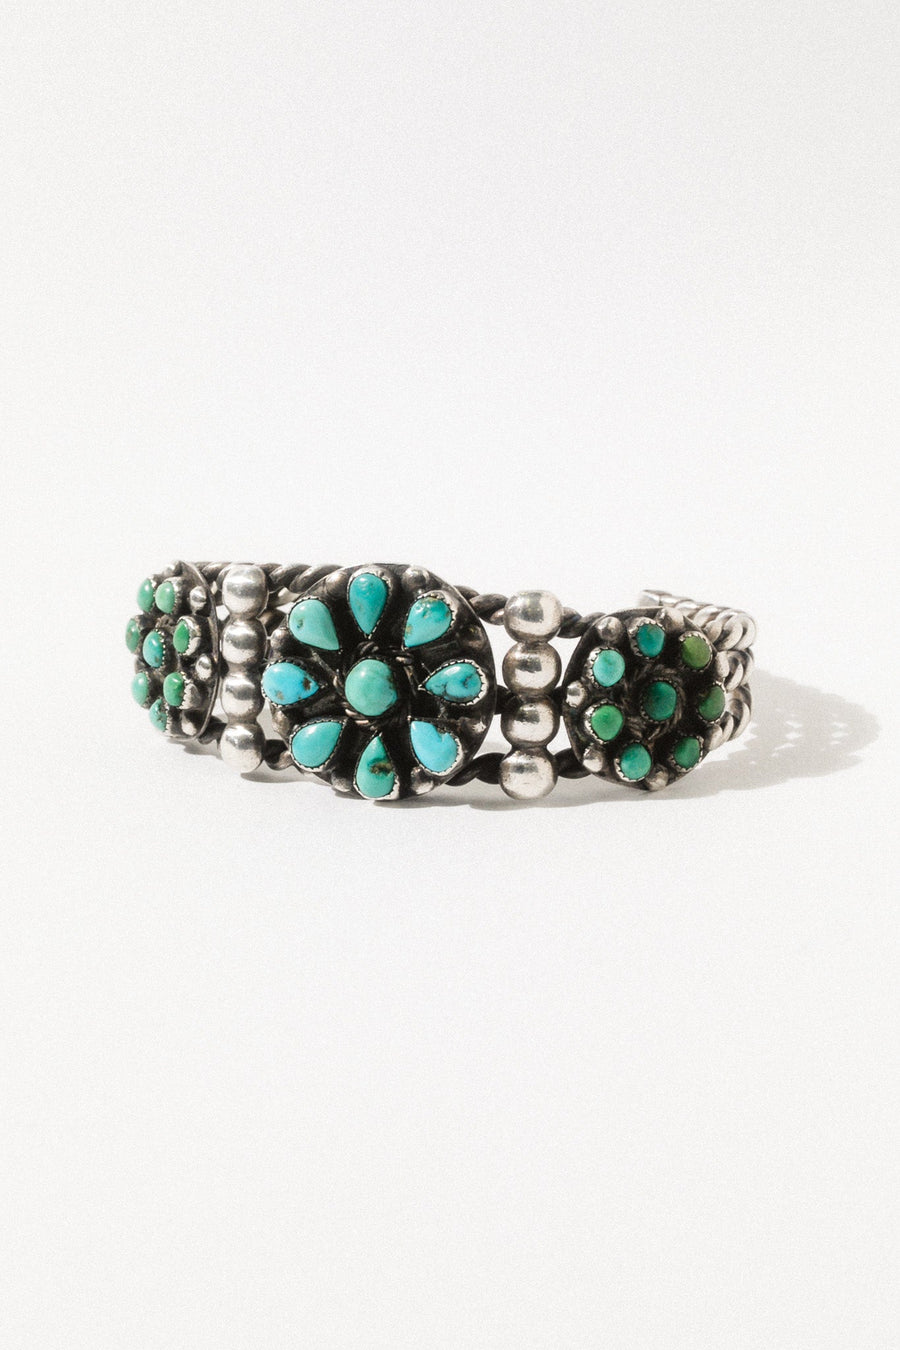 Ayman deadstock Silver / Turquoise Full Bloom Native American Cuff